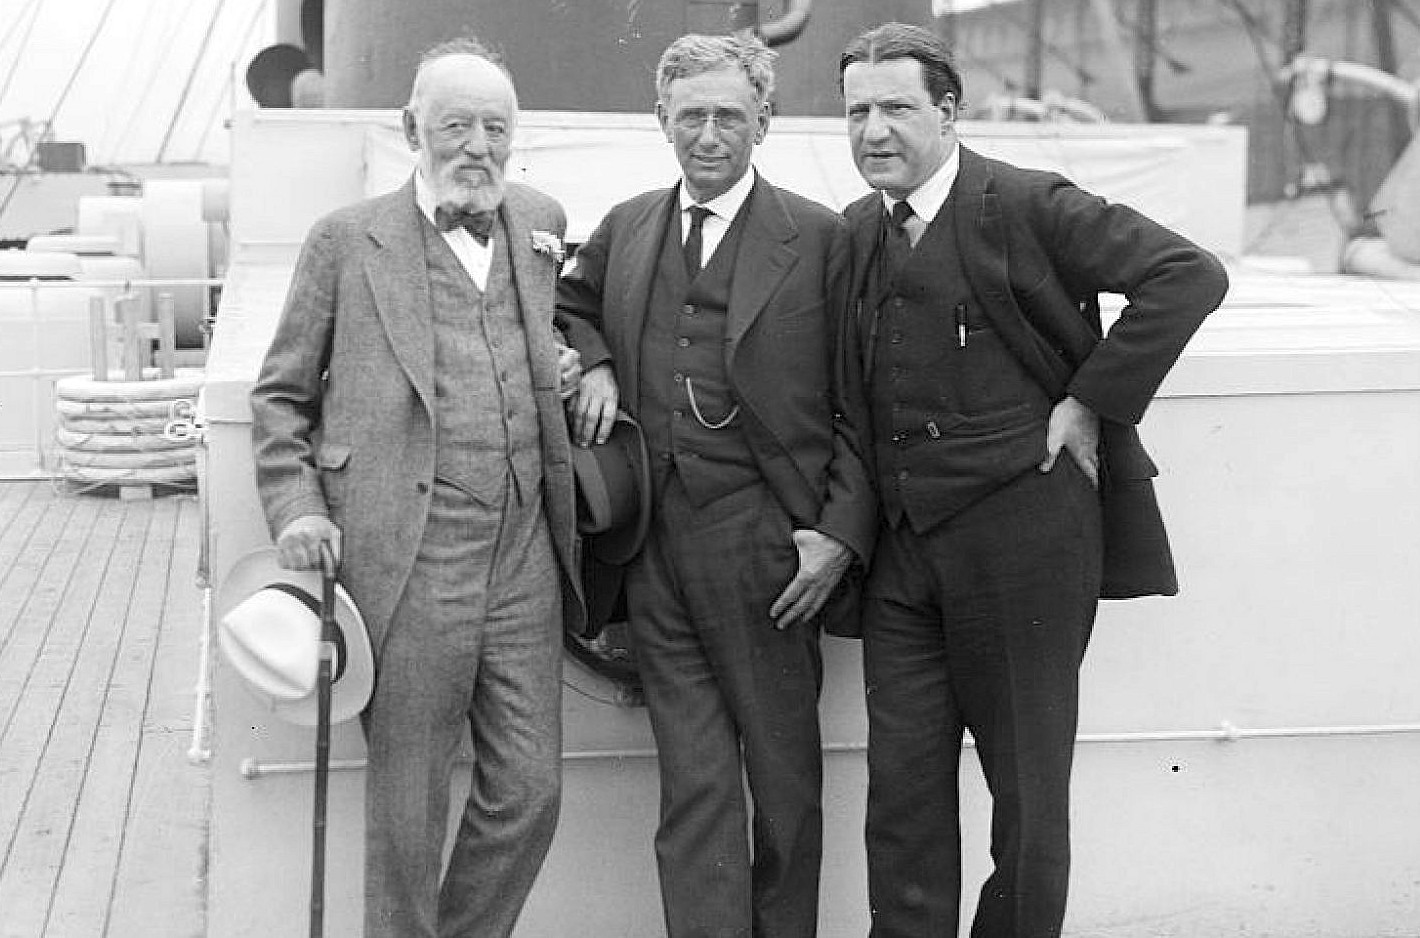 From left: Nathan Straus, Louis Dembitz Brandeis and Stephen Samuel Wise.